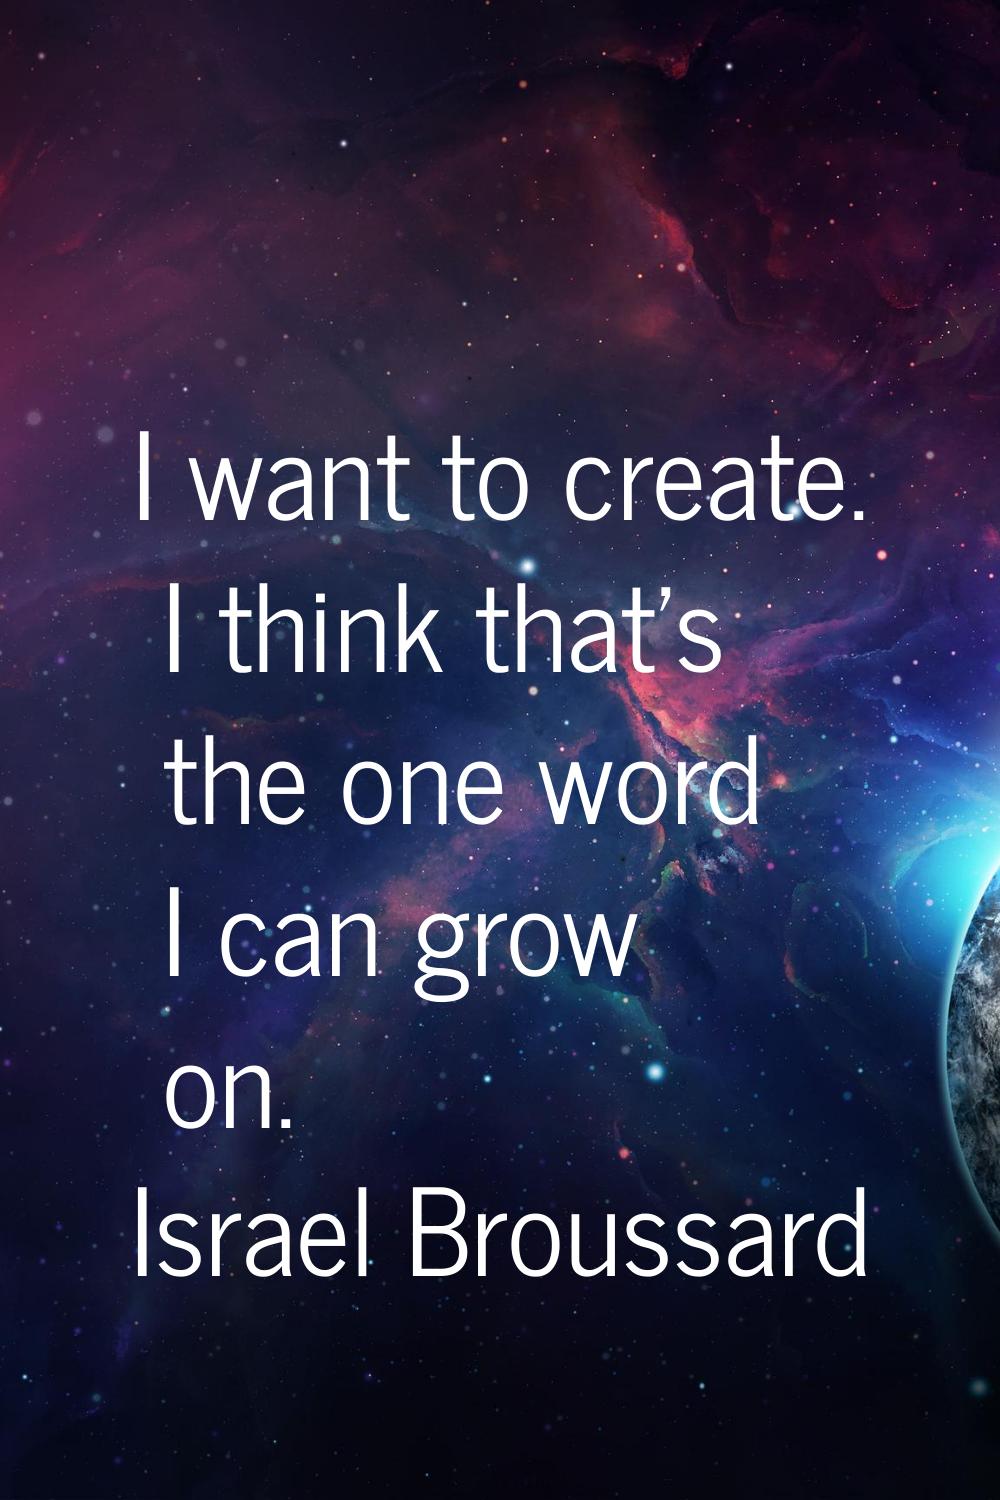 I want to create. I think that's the one word I can grow on.